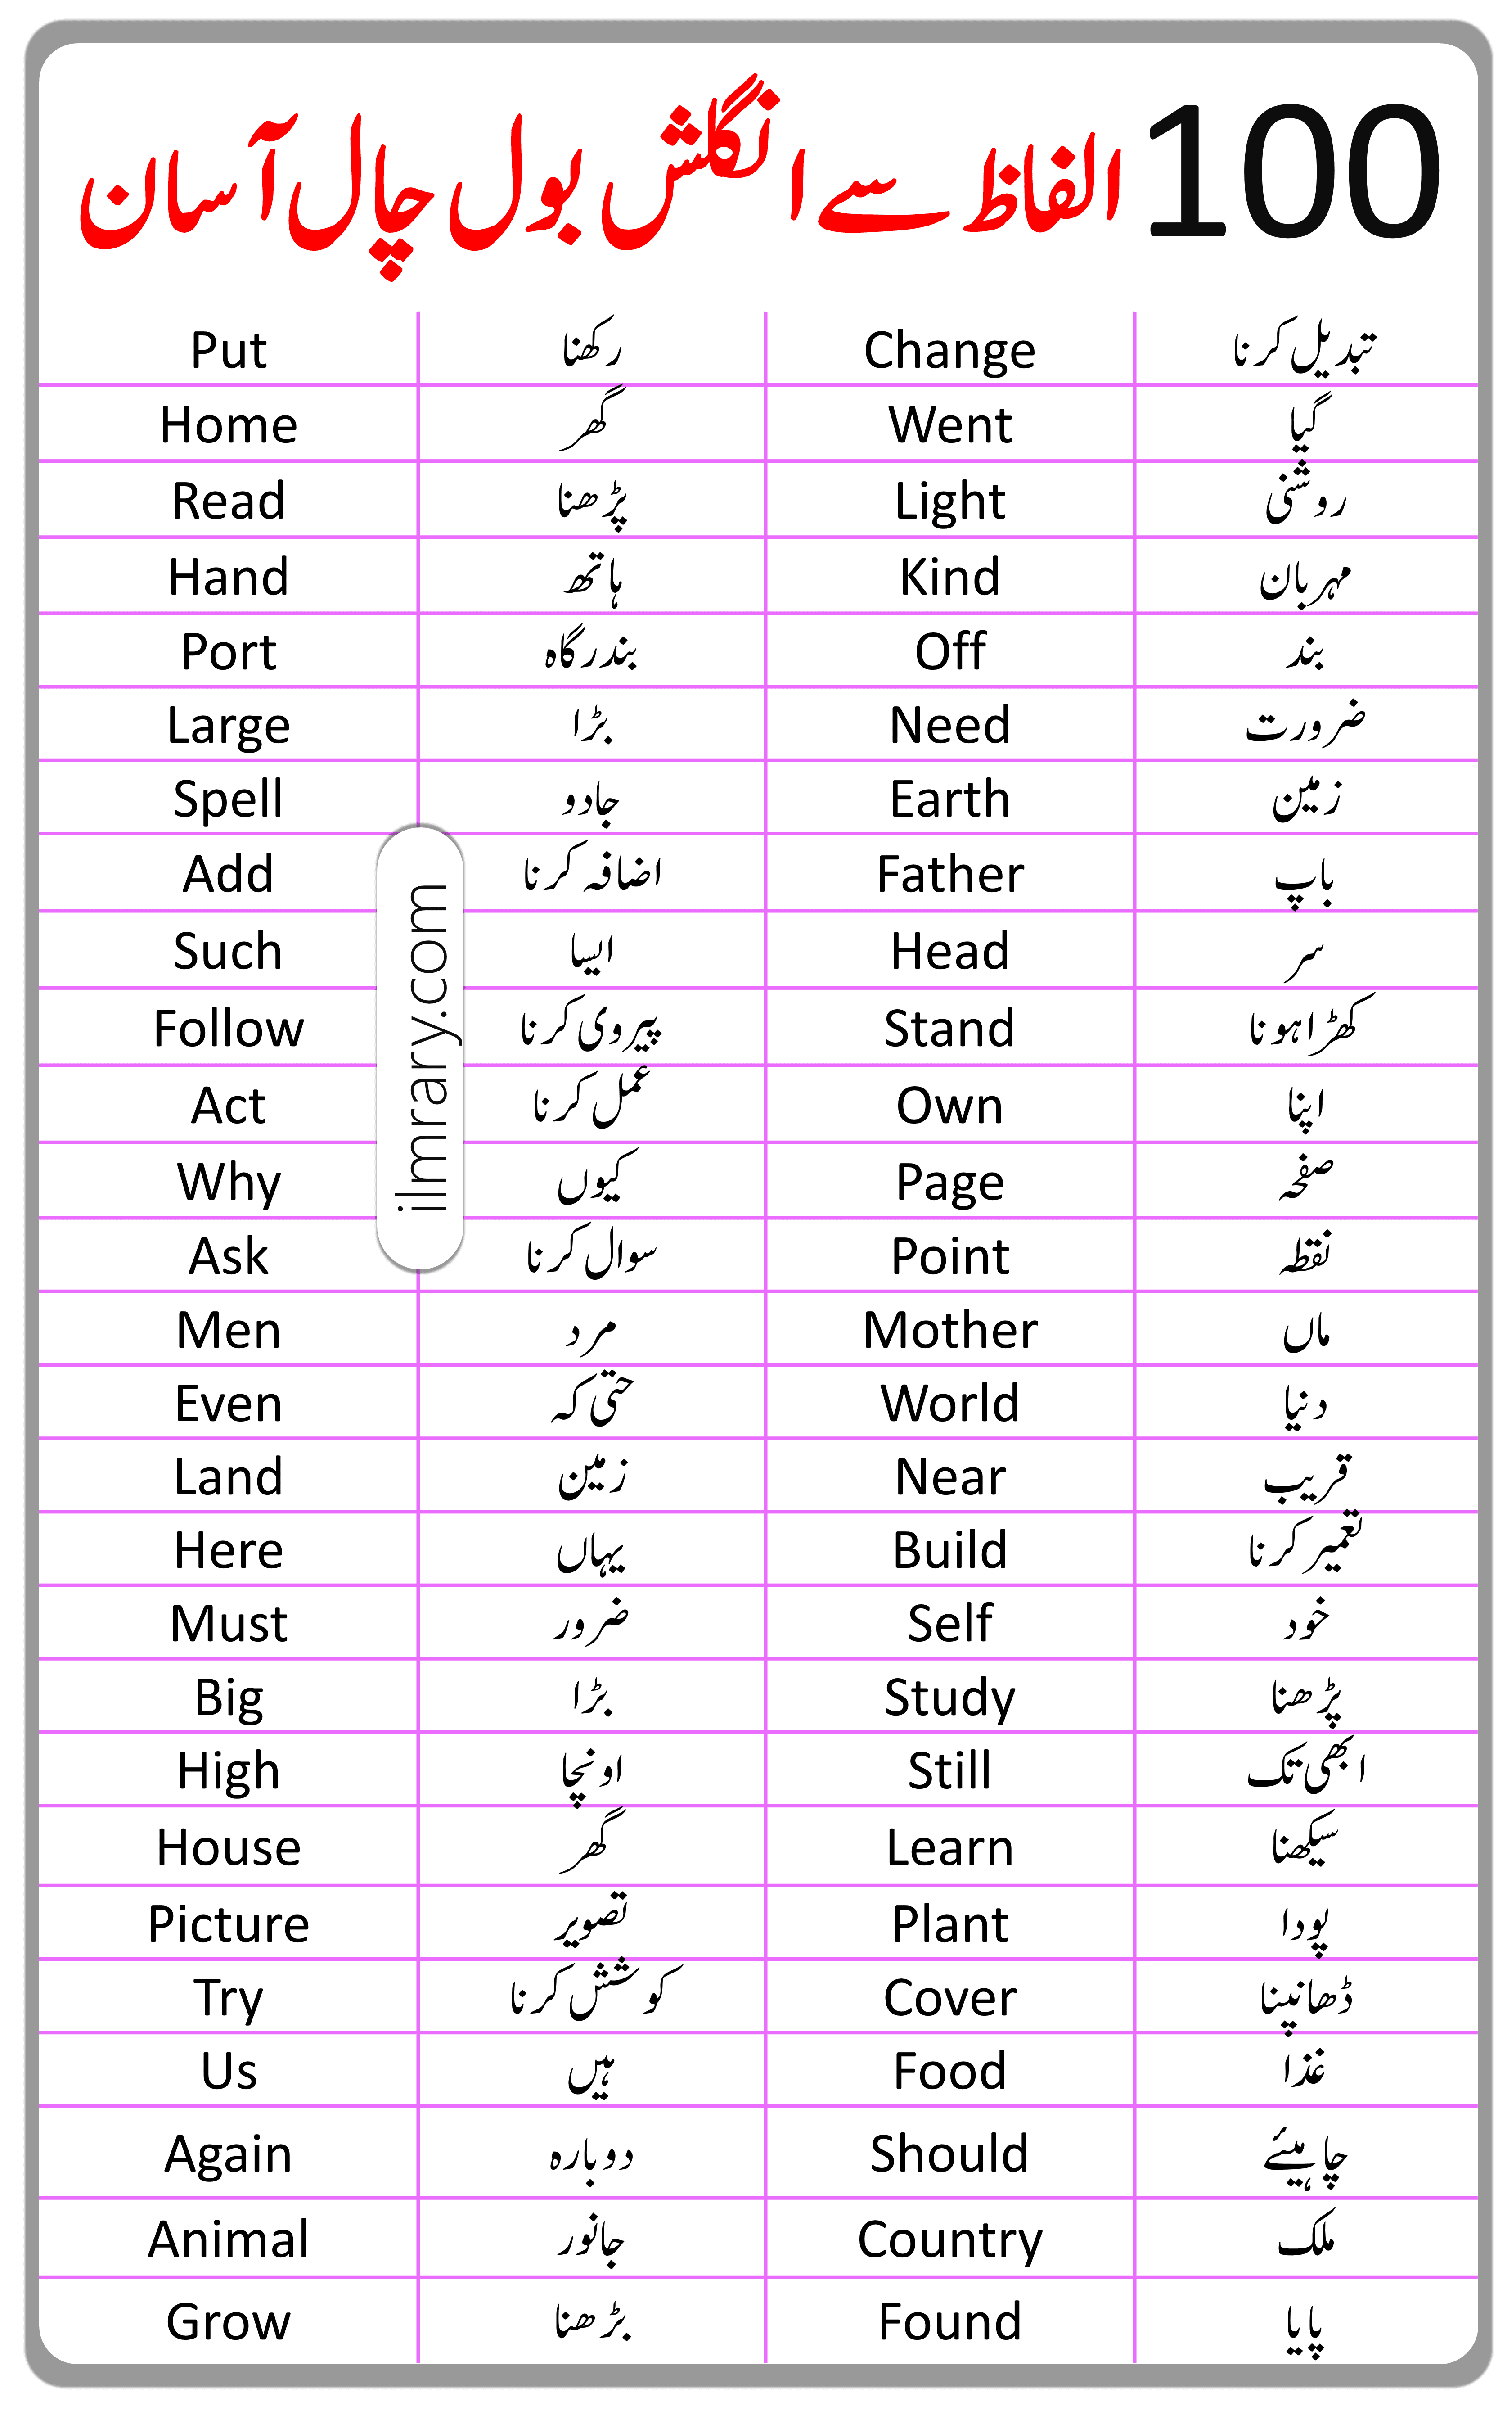 2000 Basic English Vocabulary Words with Urdu Meanings